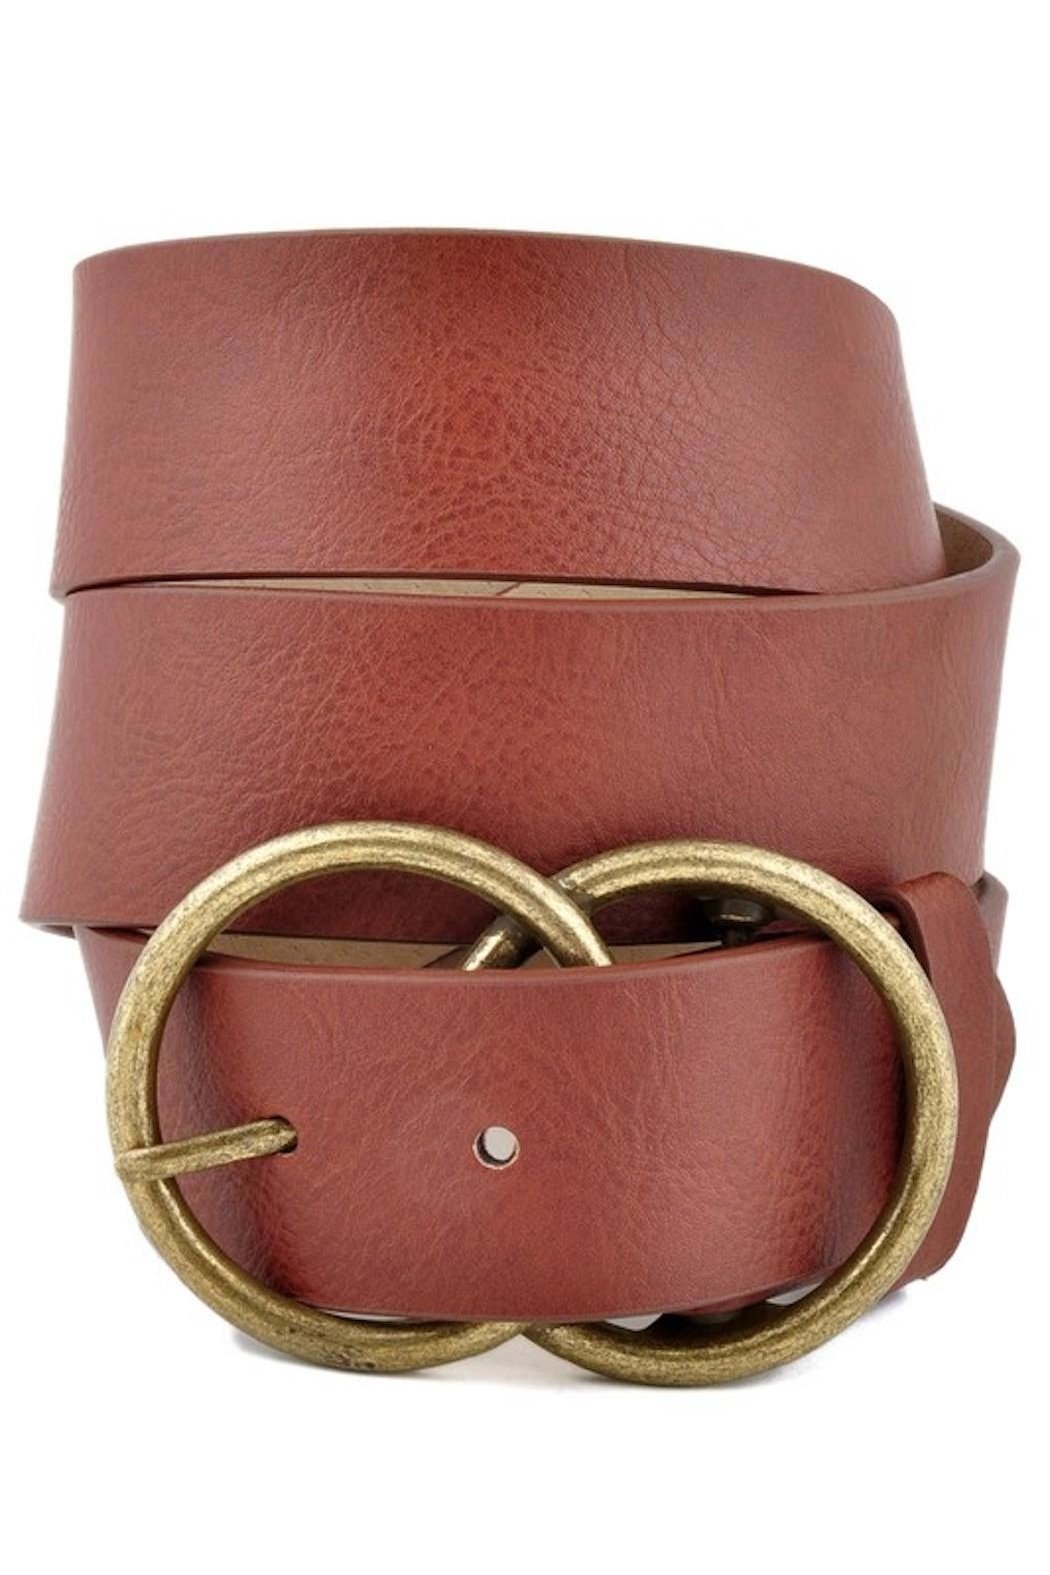 Brown Belt with Gold Buckle Main